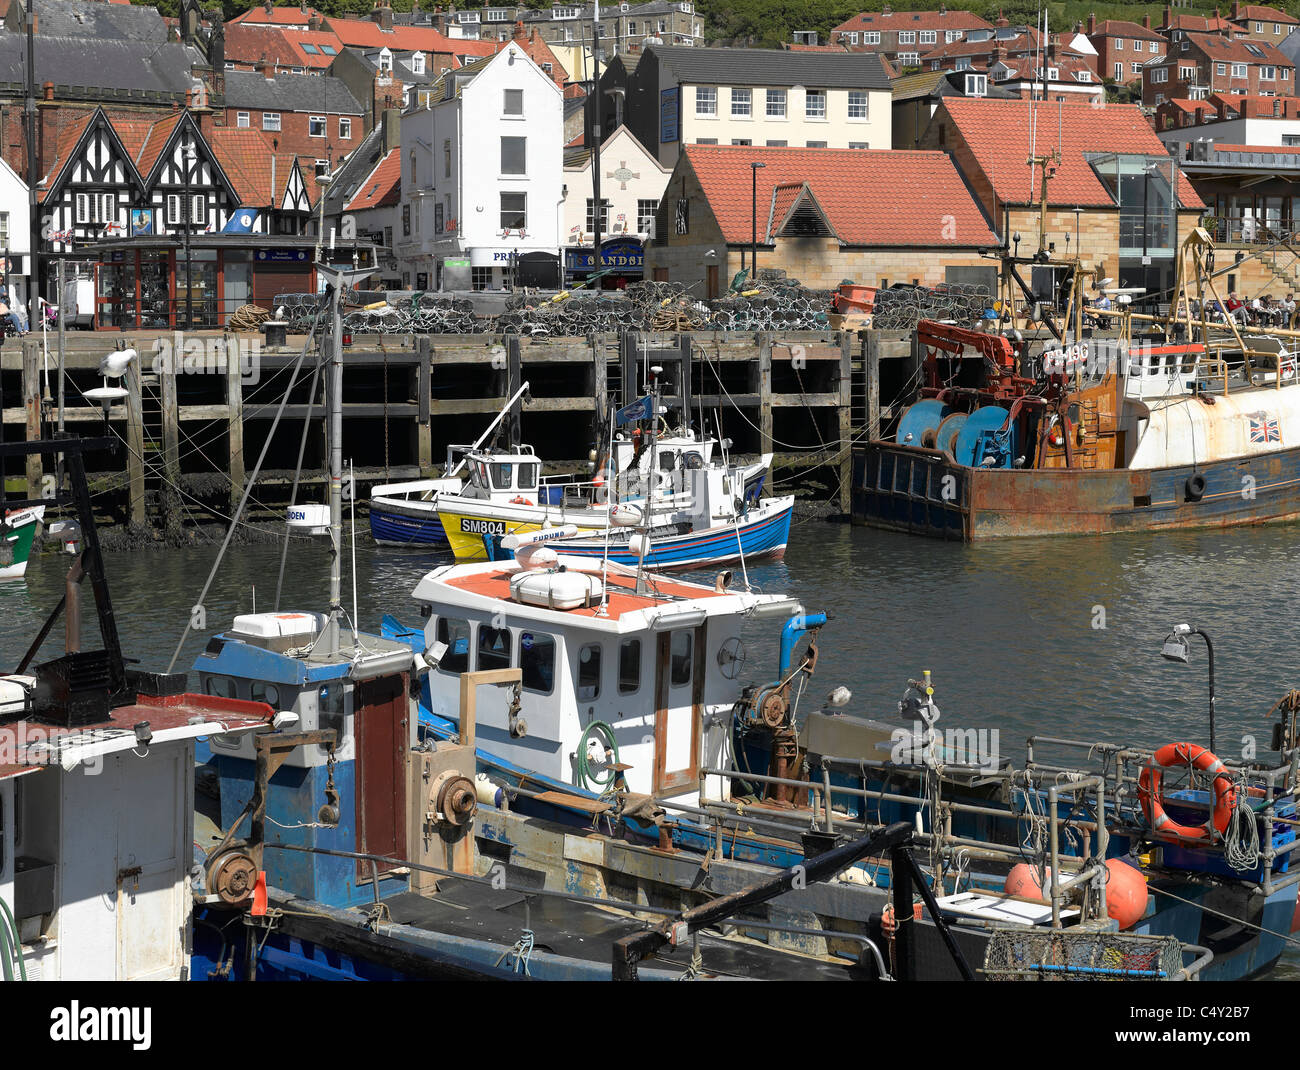 Fishing boat boats moored in Scarborough Harbour North Yorkshire England UK United Kingdom GB Great Britain Stock Photo